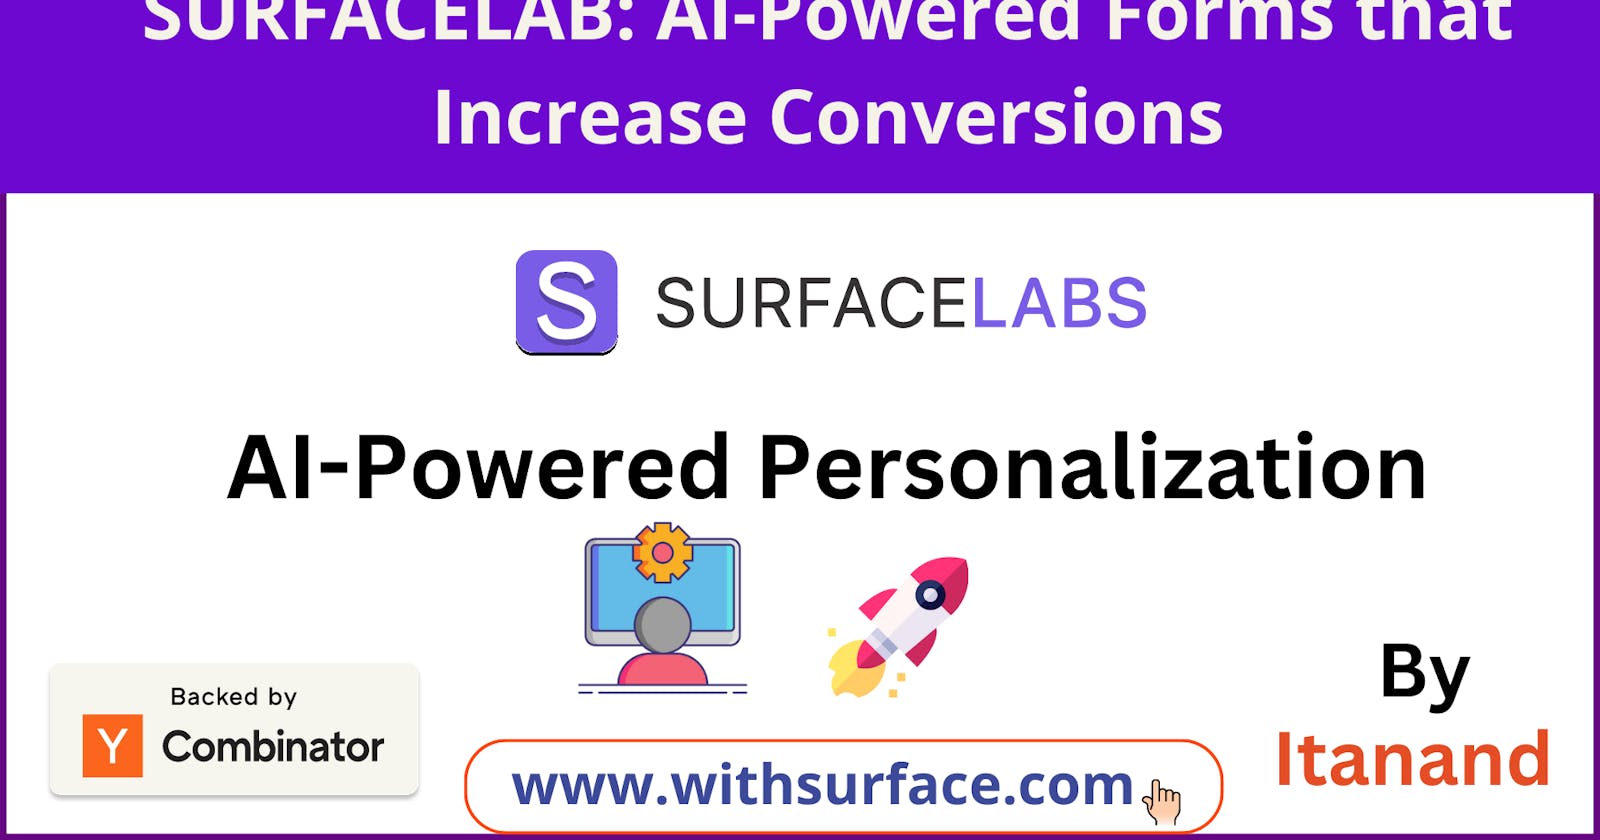 Elevating Conversions and Customer Engagement with AI-Powered Forms: The Surface Labs Solution